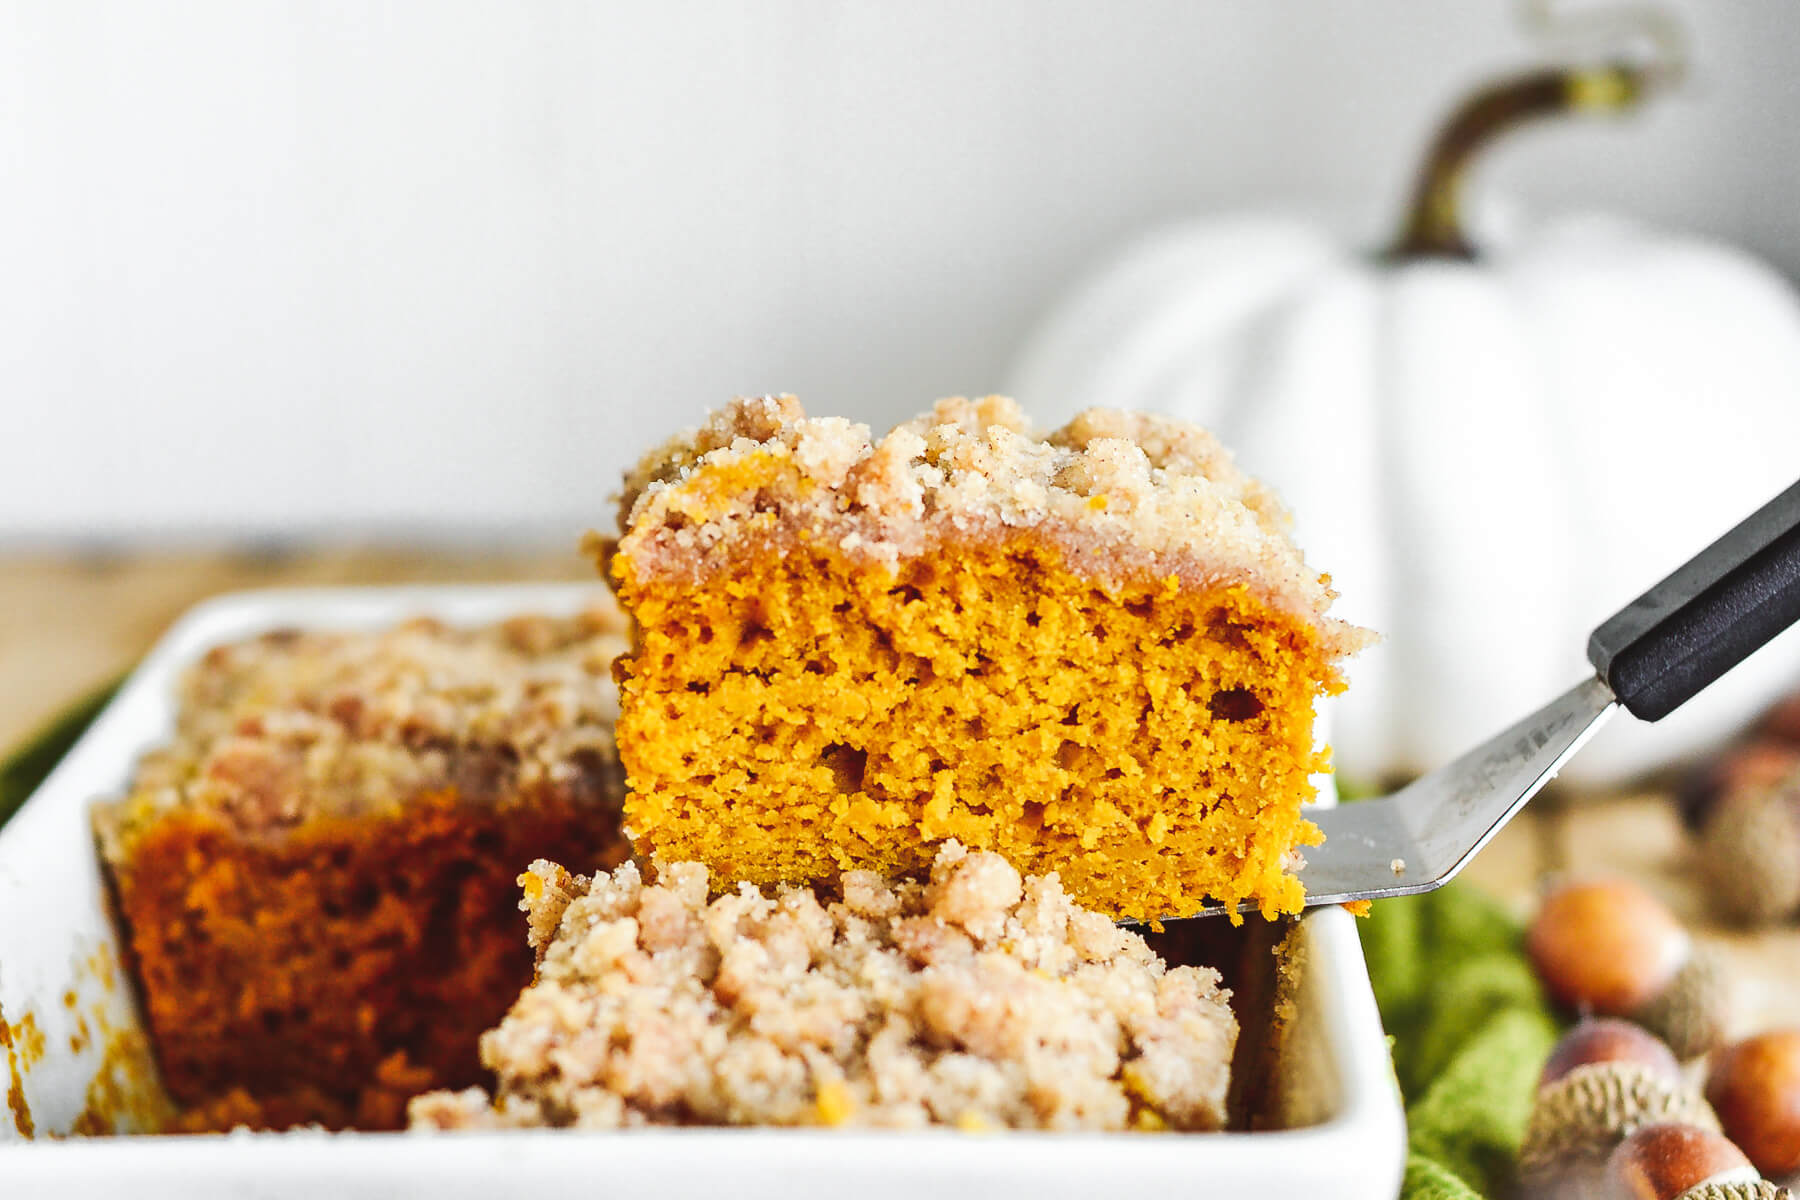 A square of fluffy orange pumpkin coffee cake topped with streusel being removed from a white baking dish.